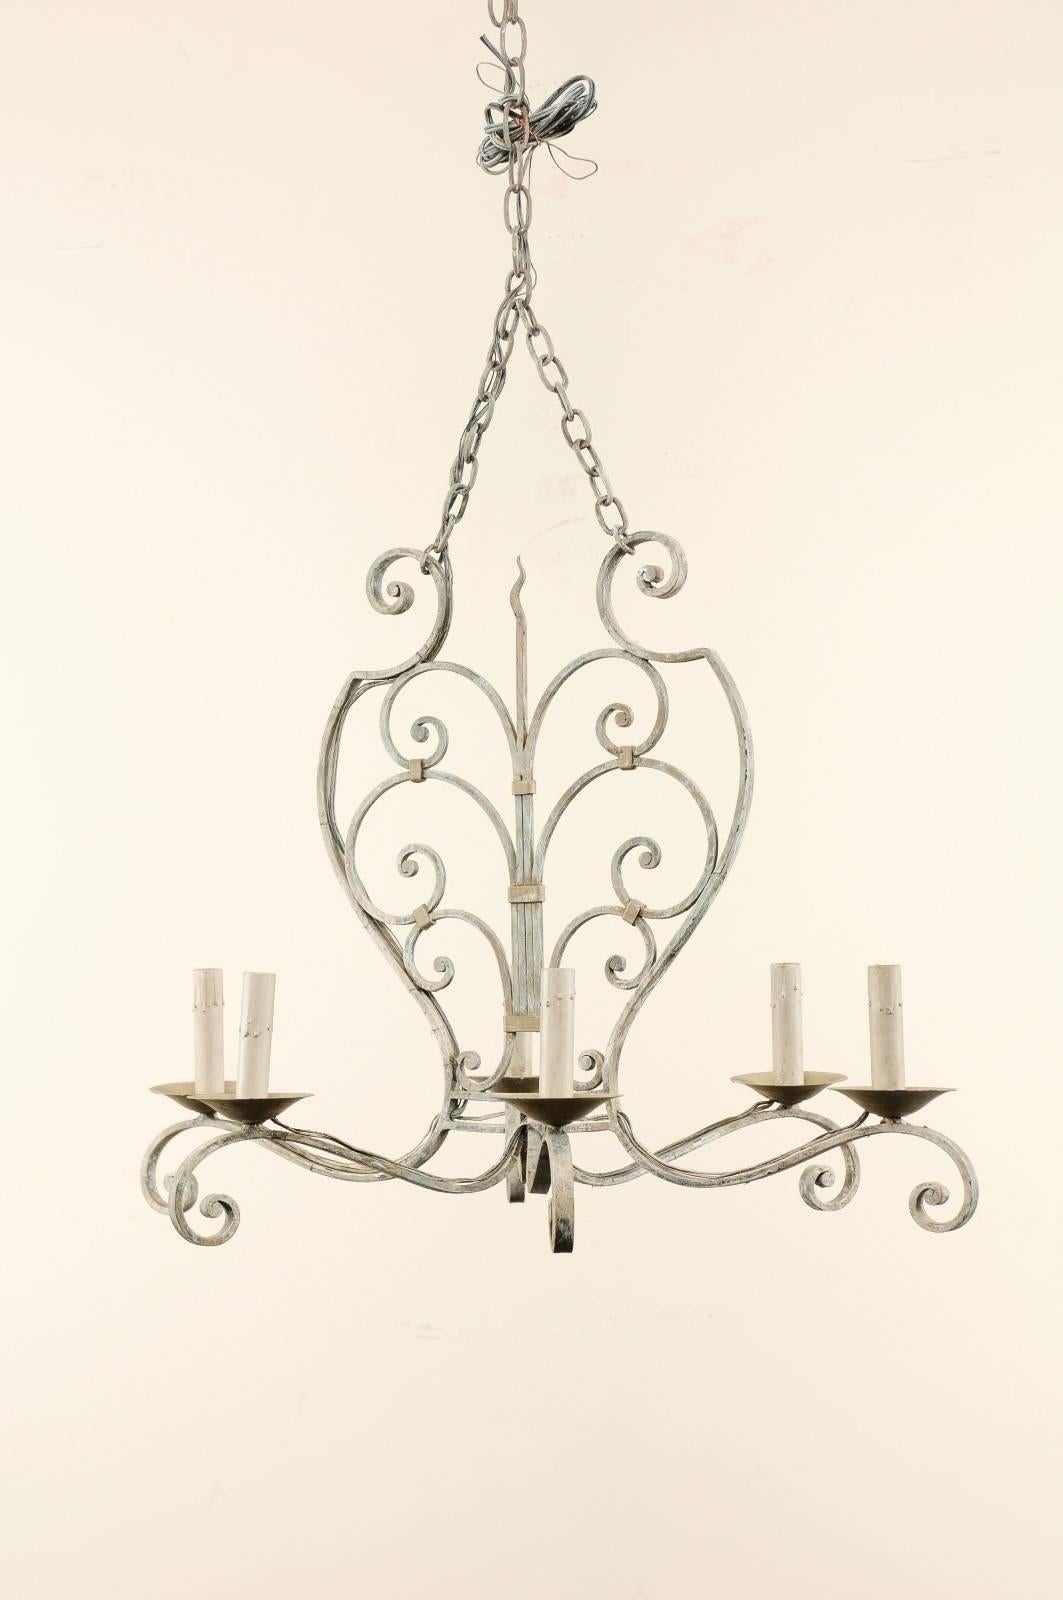 A French midcentury painted iron chandelier. This vintage French six-light painted iron chandelier features a central two-dimensional body made of c-scrolls of various sizes joining at a central flame looking beam. This piece is very symmetrical and